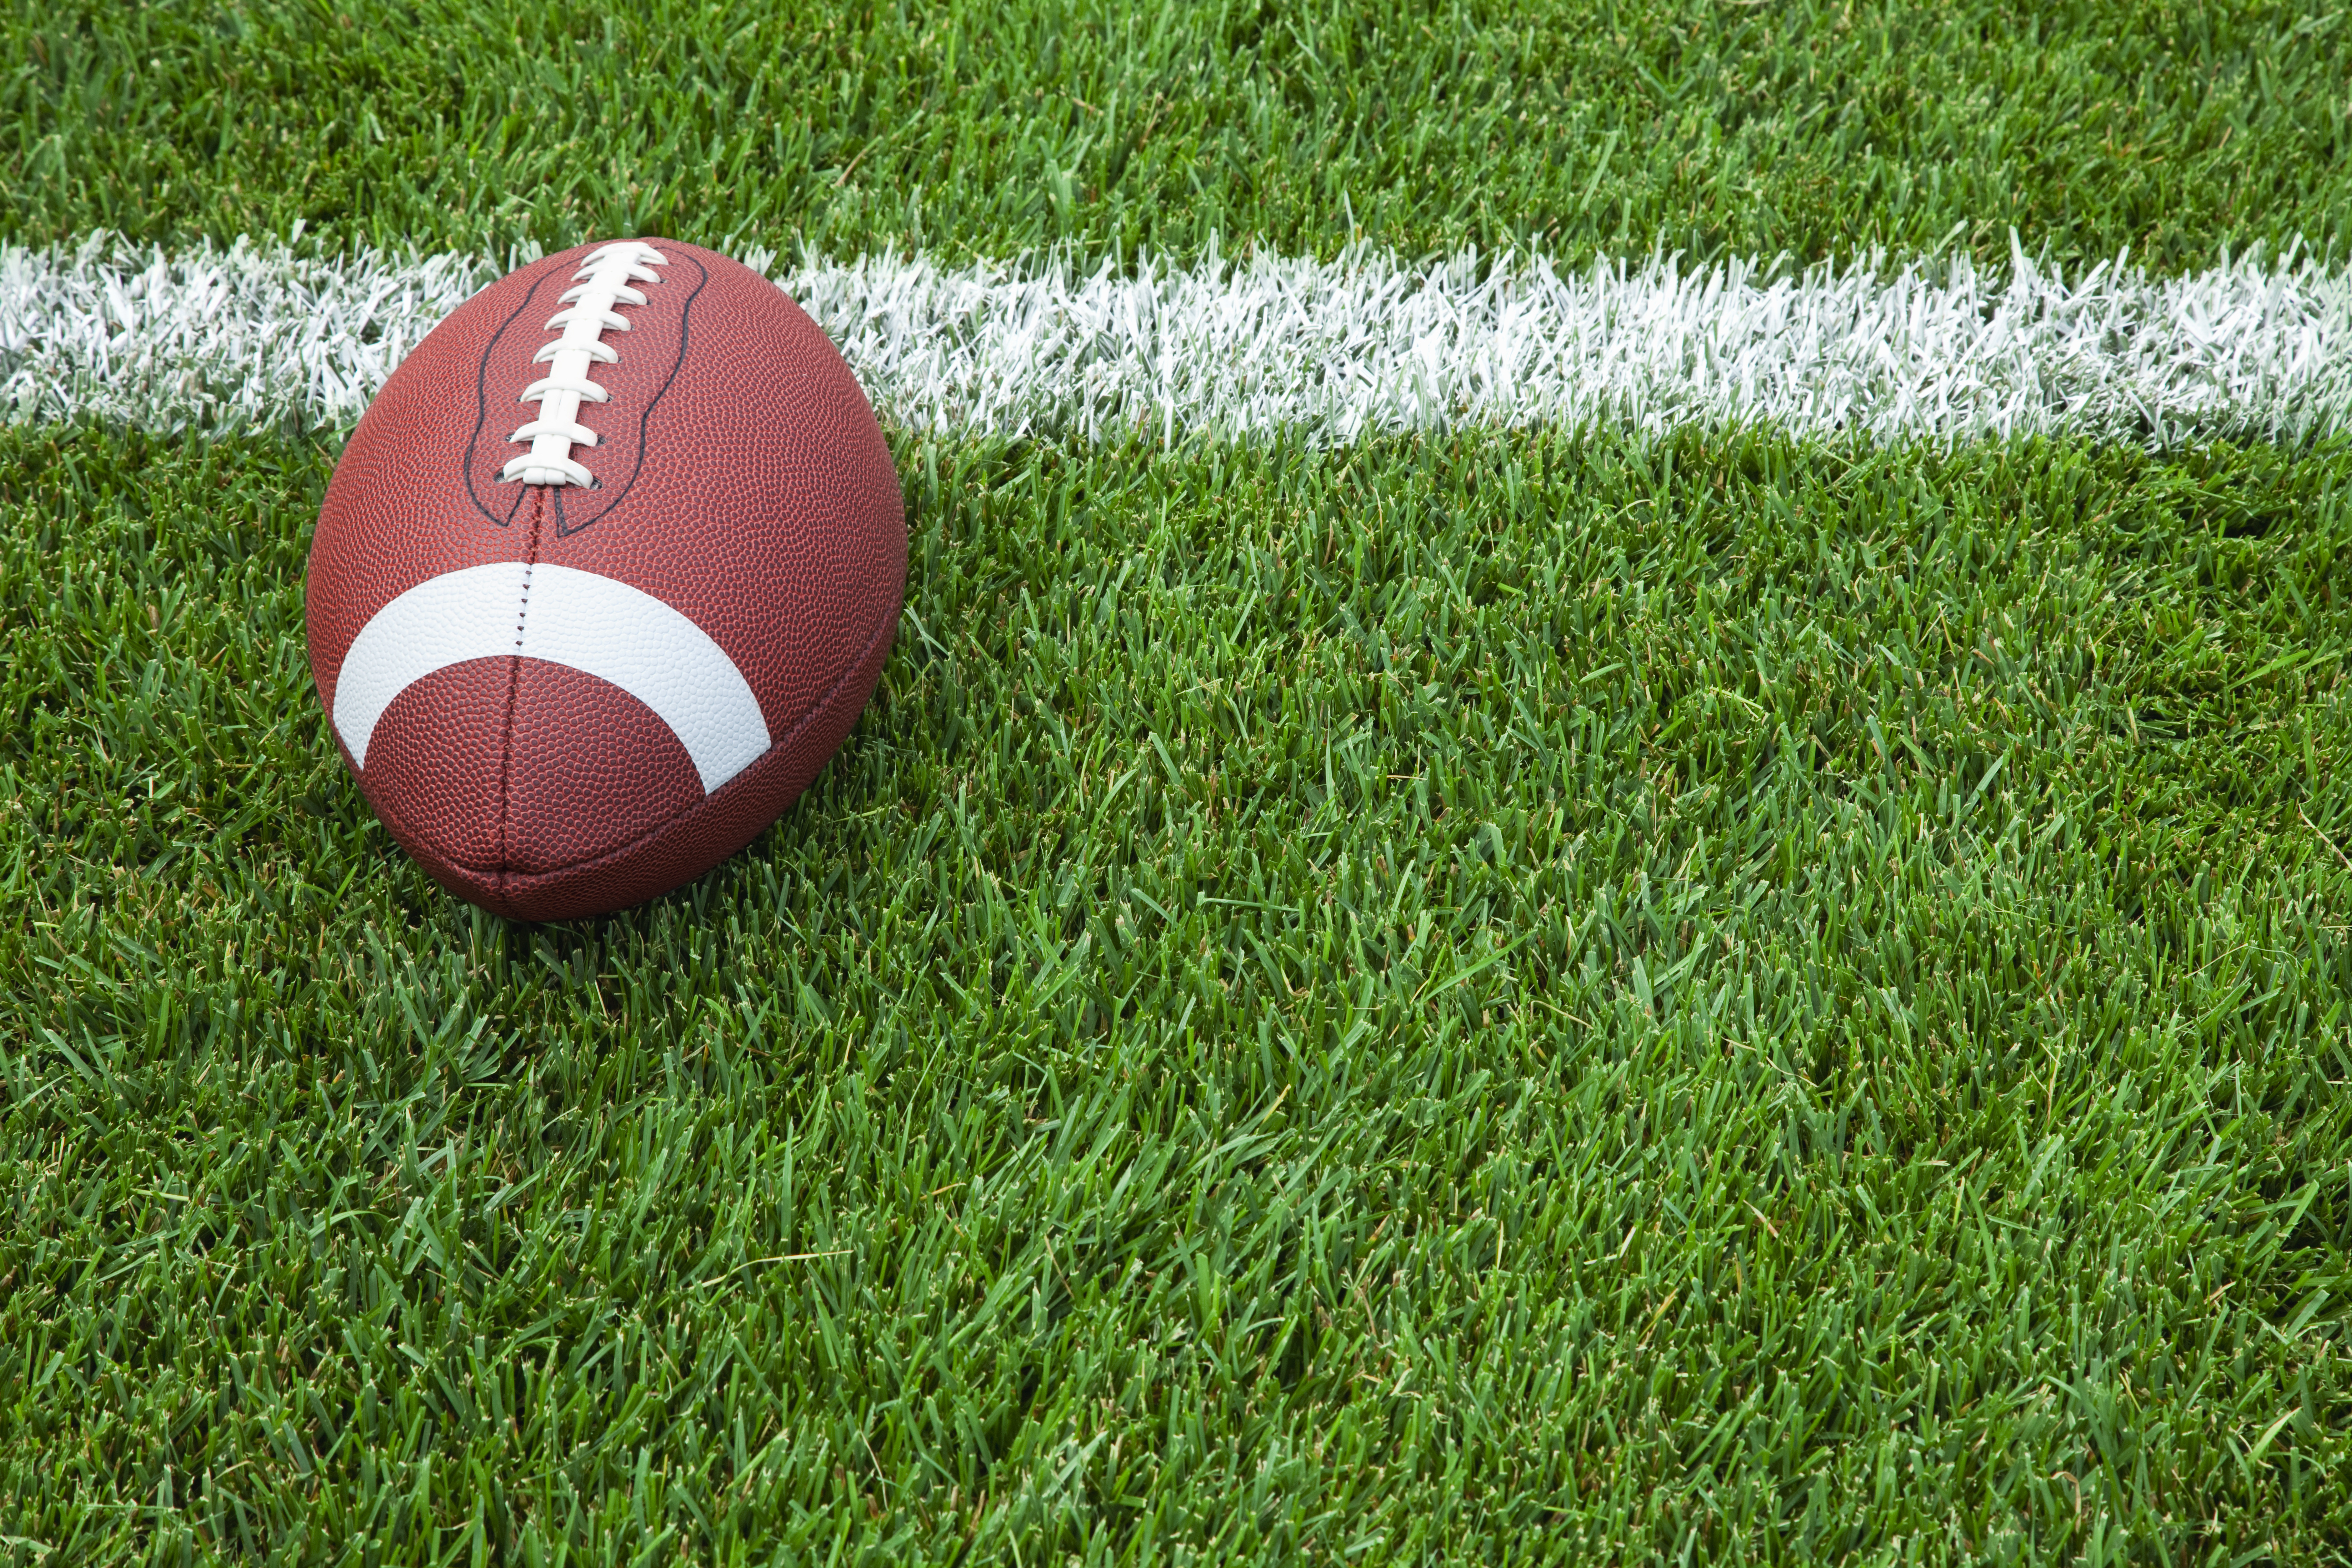 A college football at the goal line on a grass field